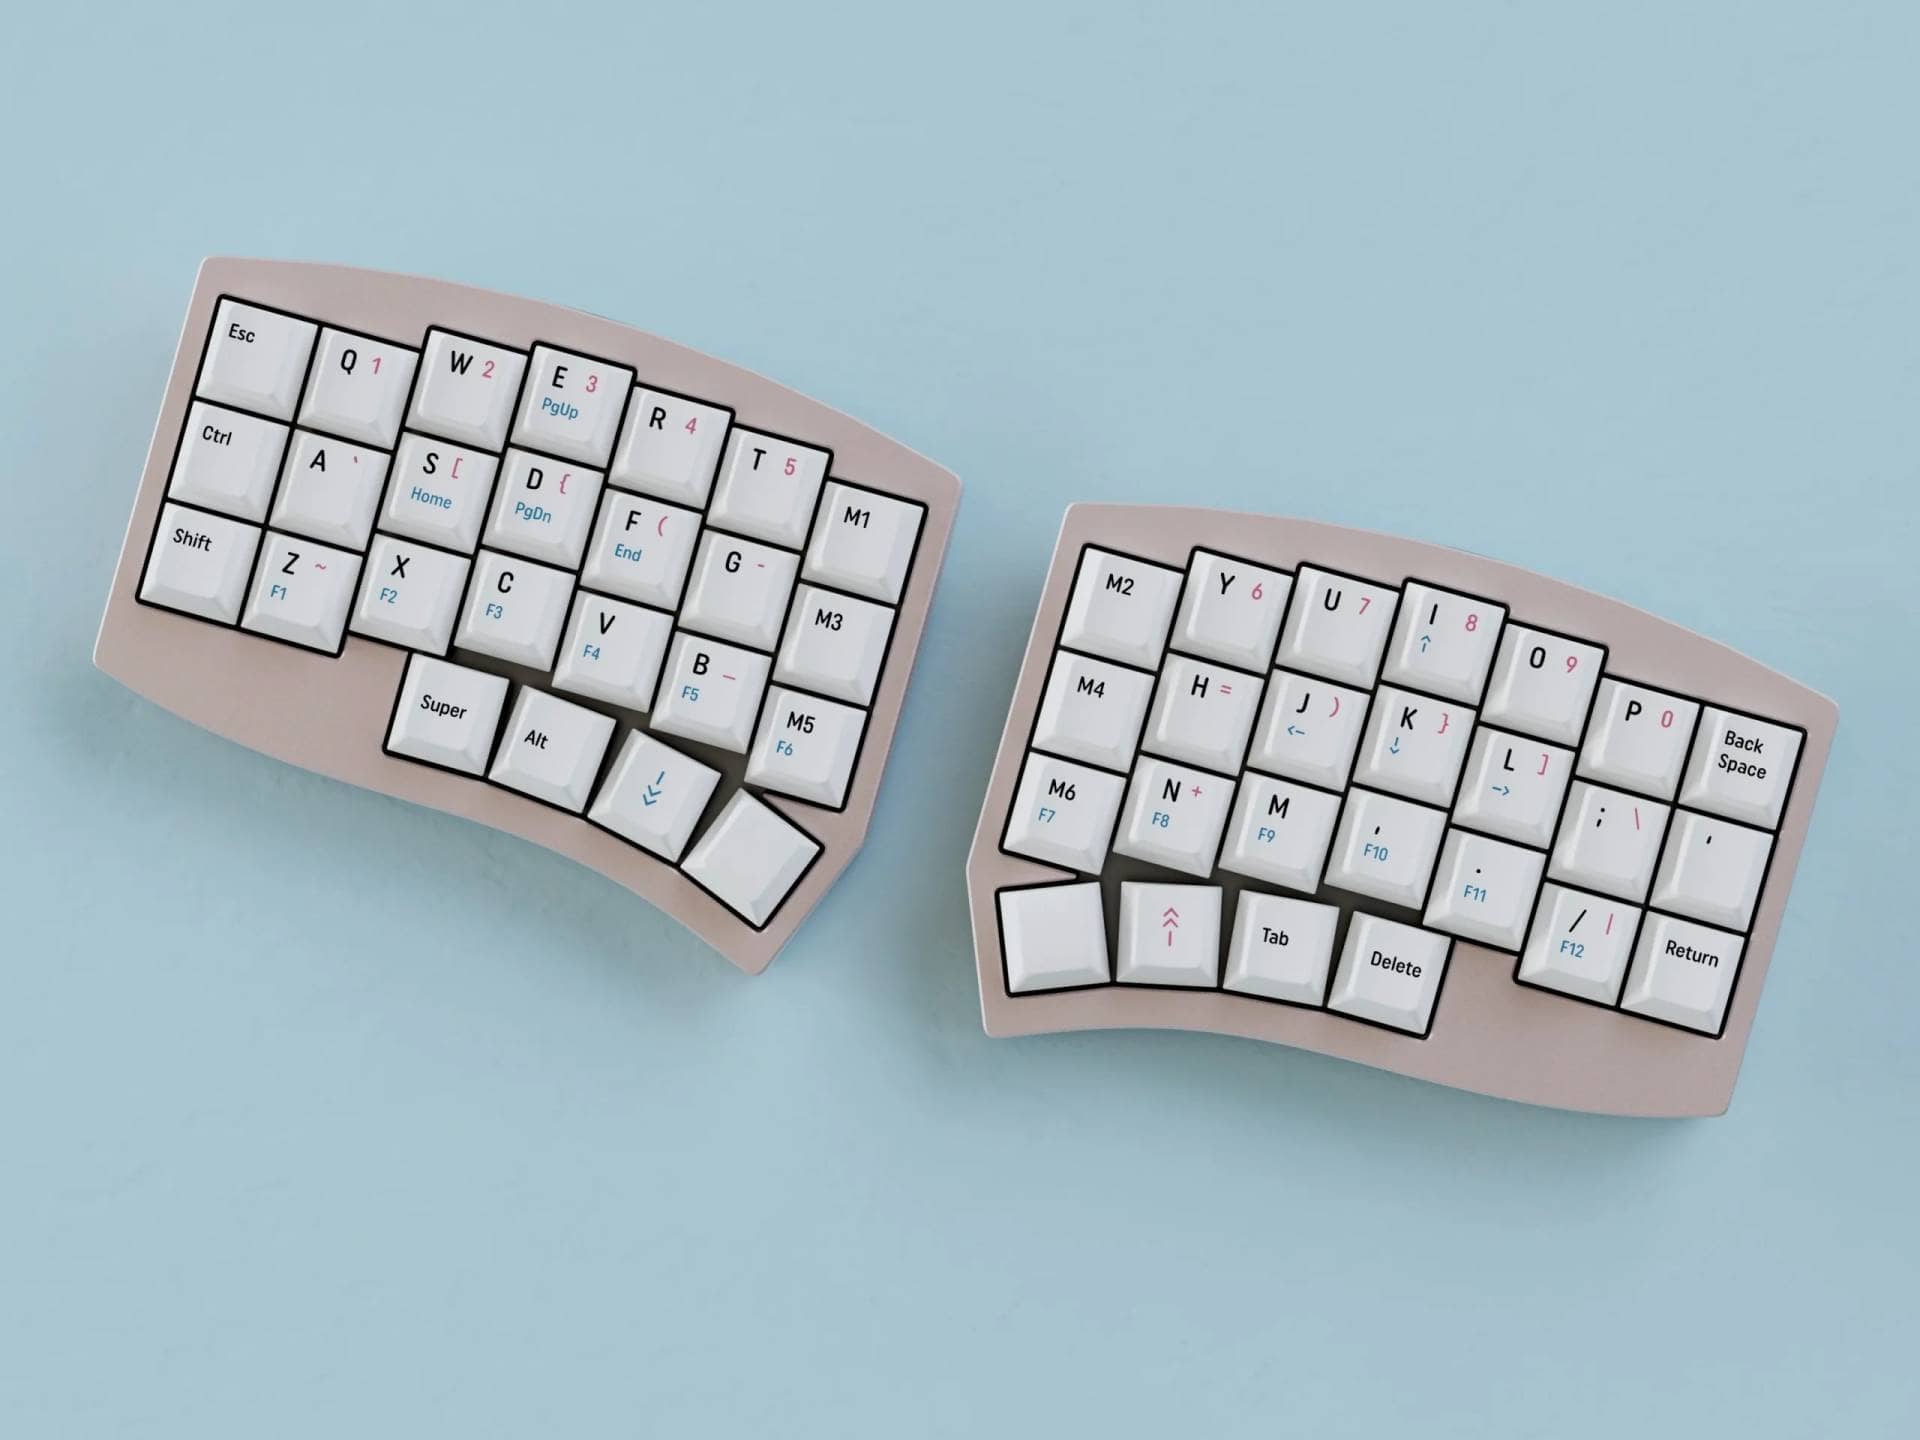 AltairX Keycaps 2 Update scaled